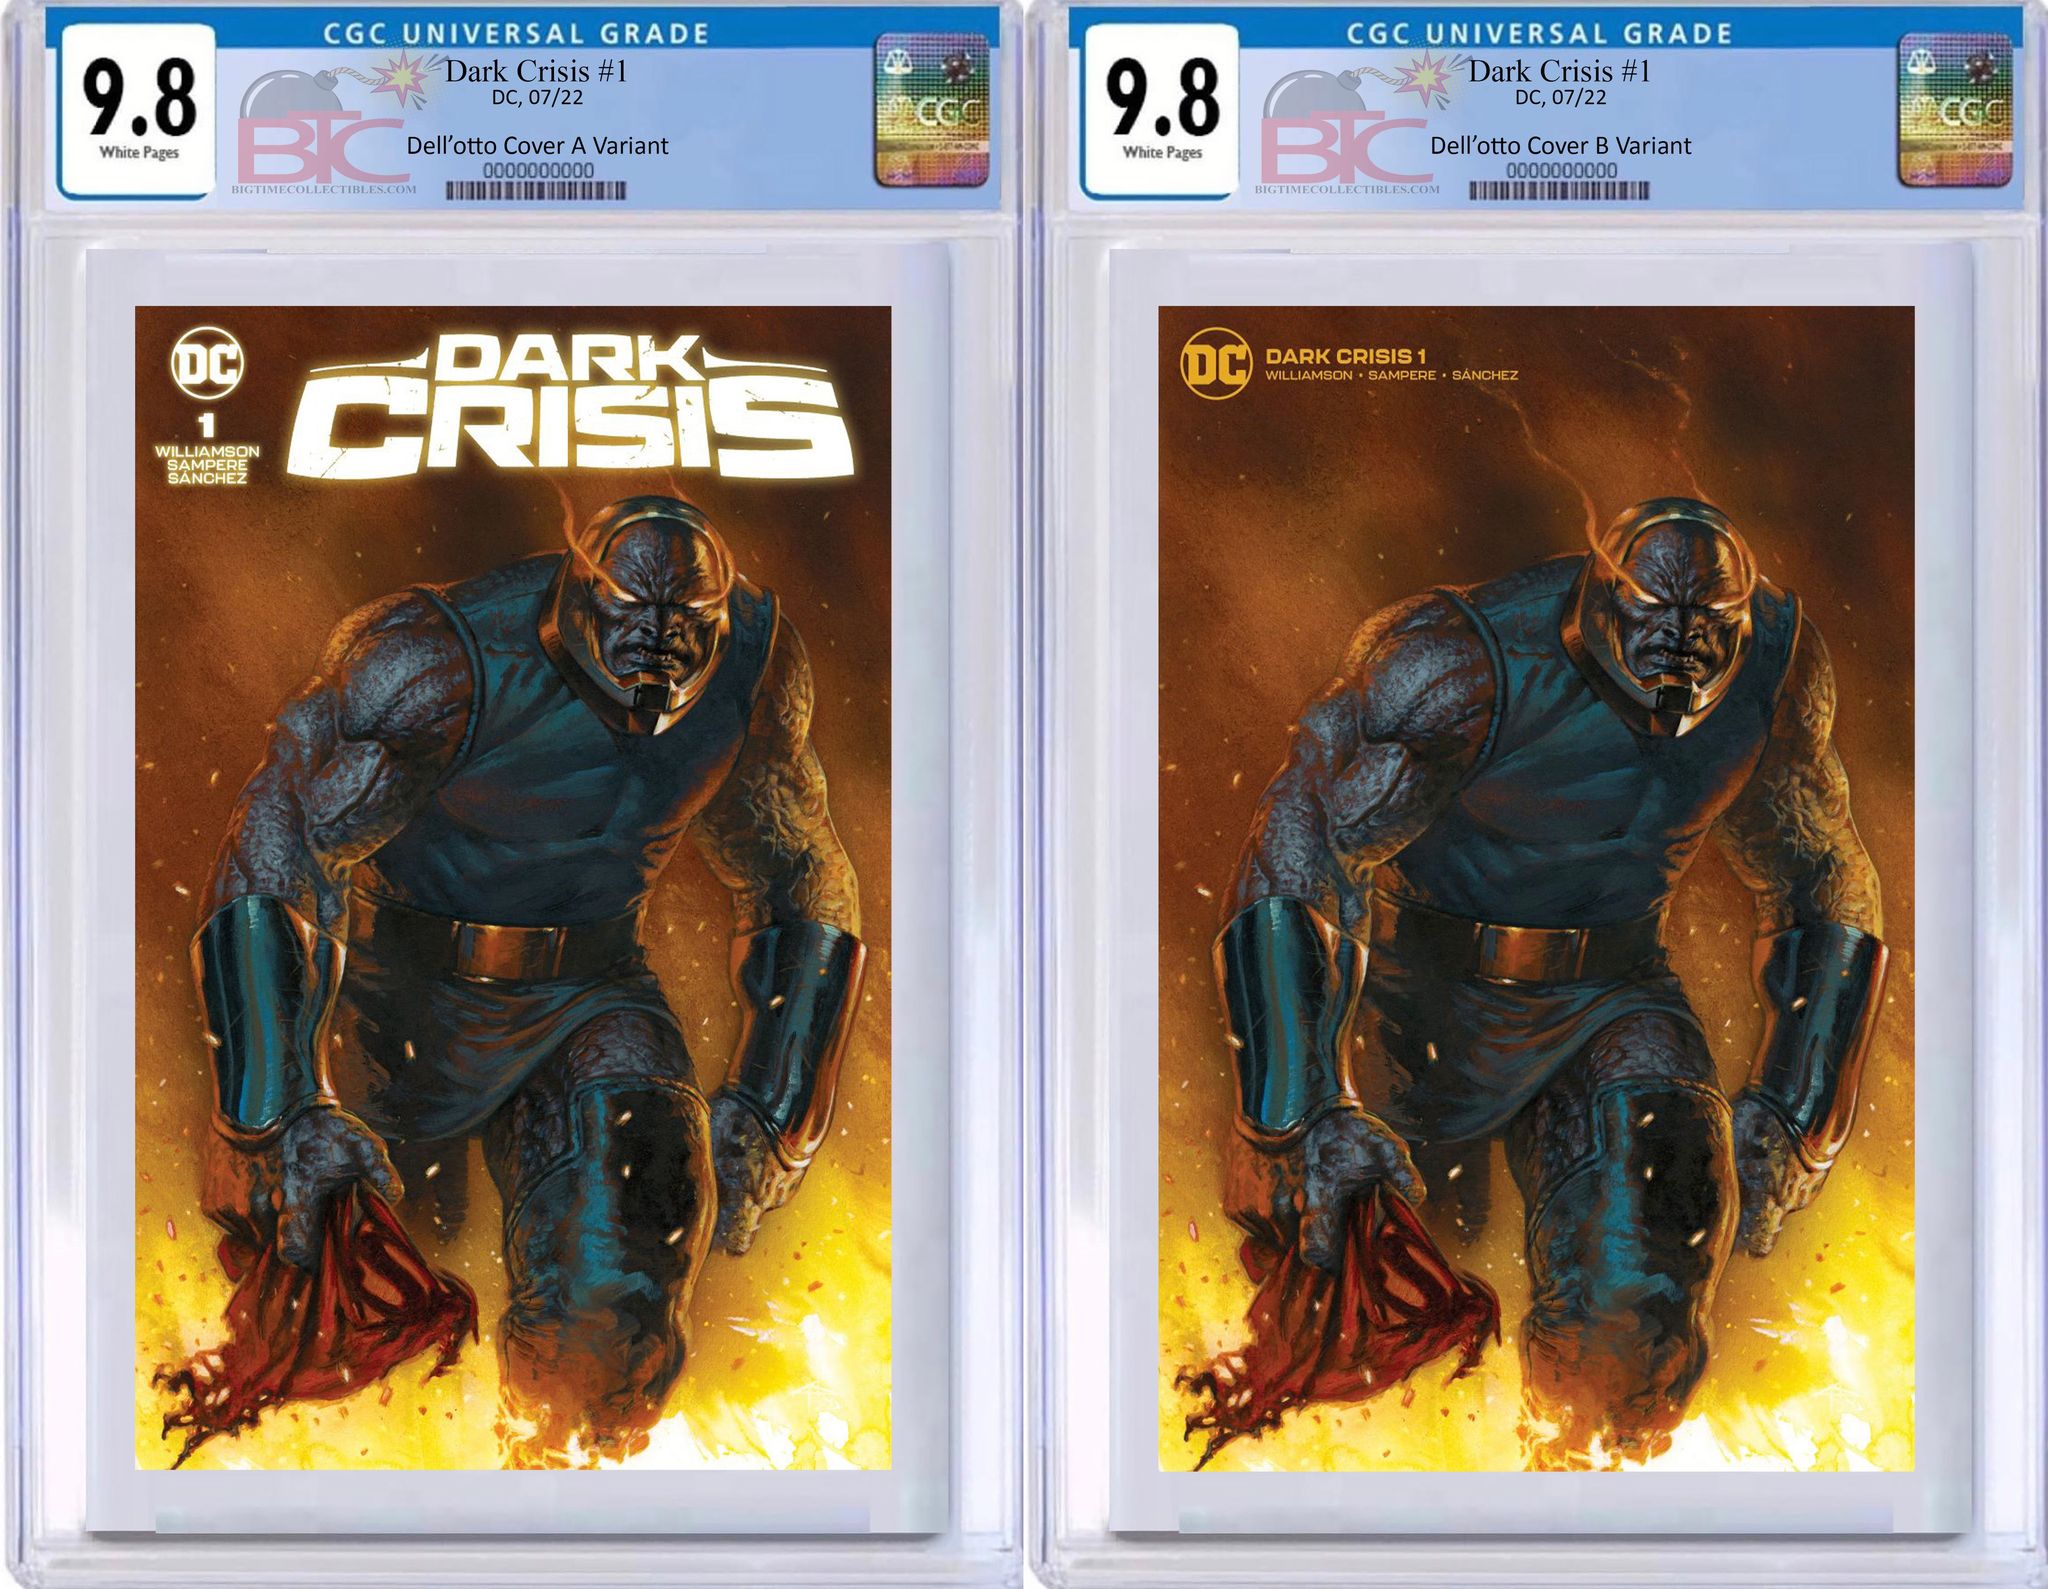 06/07/2022 DARK CRISIS #1 GABRIELE DELL'OTTO EXCLUSIVE VARIANT COVER RAW & GRADED OPTIONS (D2)